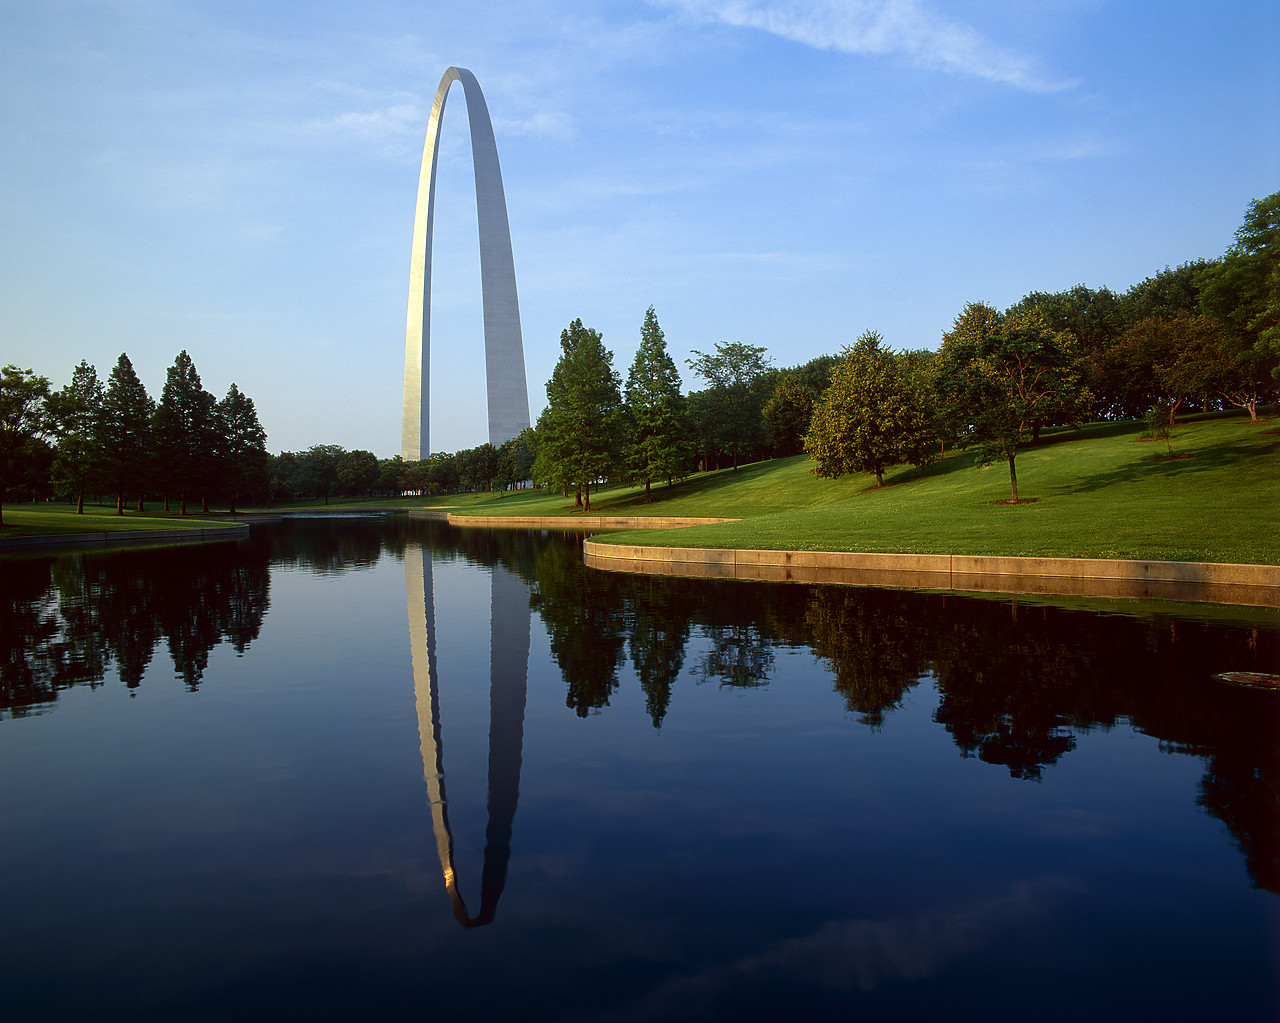 #200463-2 - The Arch Reflecting in Lake, St. Louis, Missouri, USA